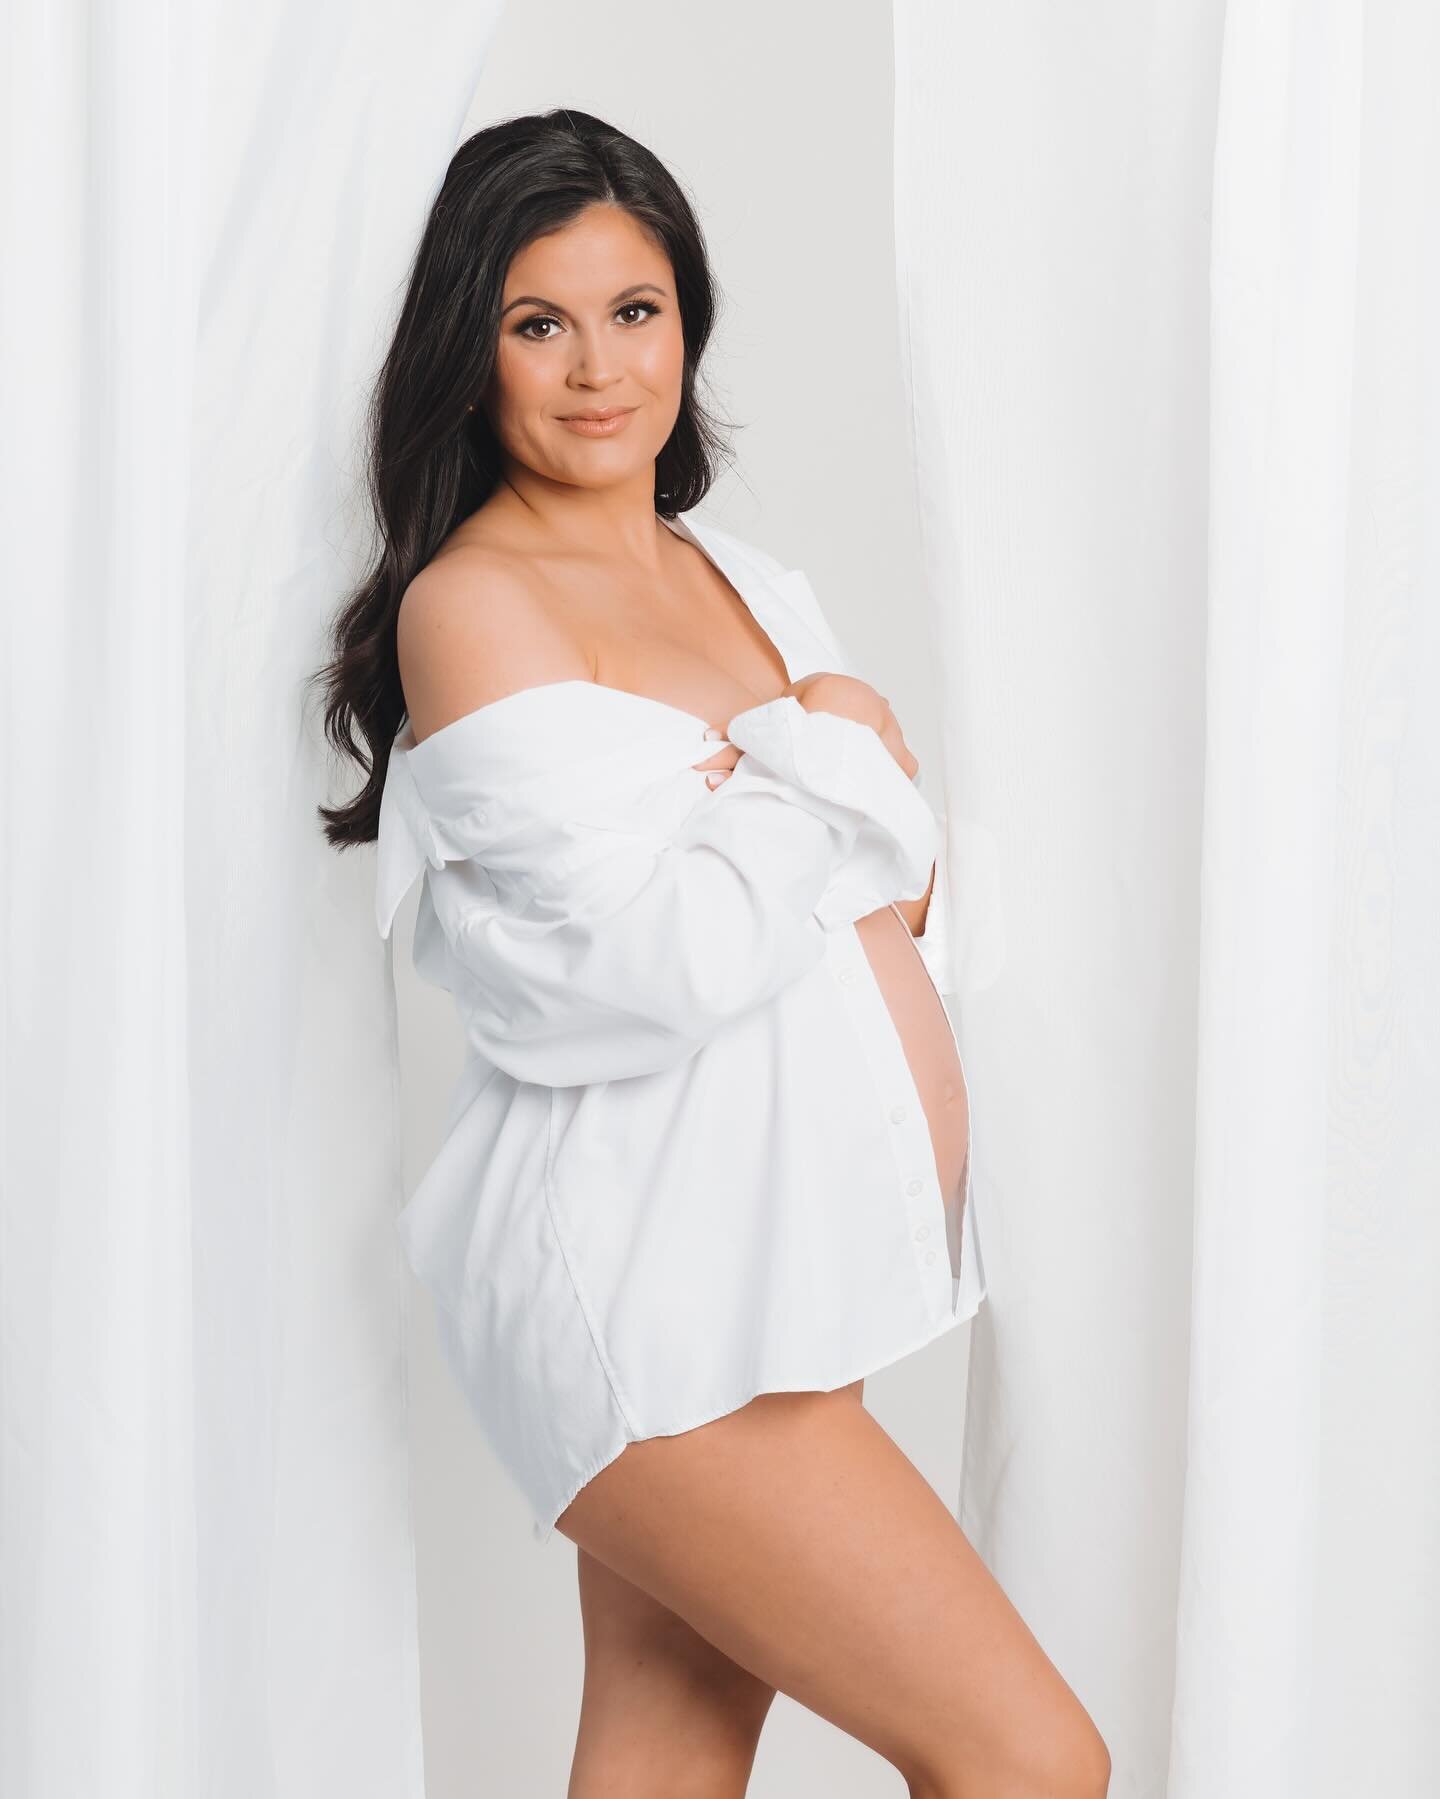 A GLOWING mama to be ✨🤍 @oliviamaddoxgriffith you are STUNNING! 
&bull;
Hair &amp; Makeup by @hmbyasianicole 
&bull;
Fill out the inquiry form on my website to book your studio maternity photoshoot 💌